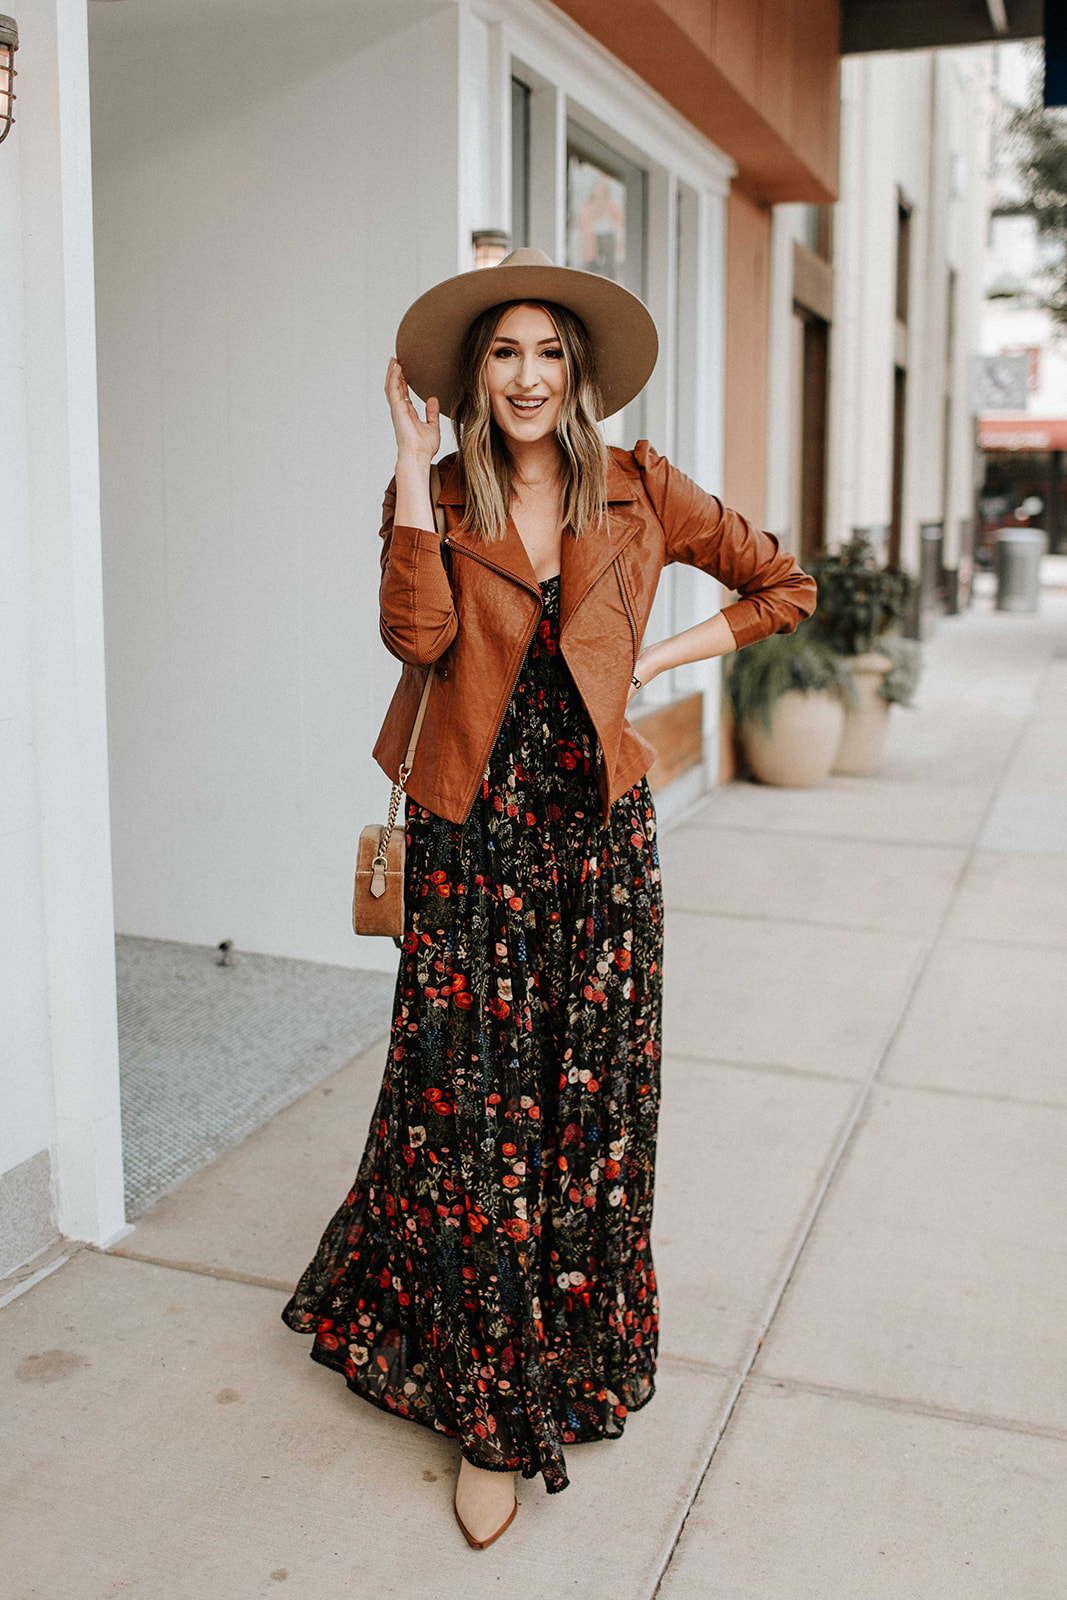 Floral Maxi Dress with Leather Jacket…